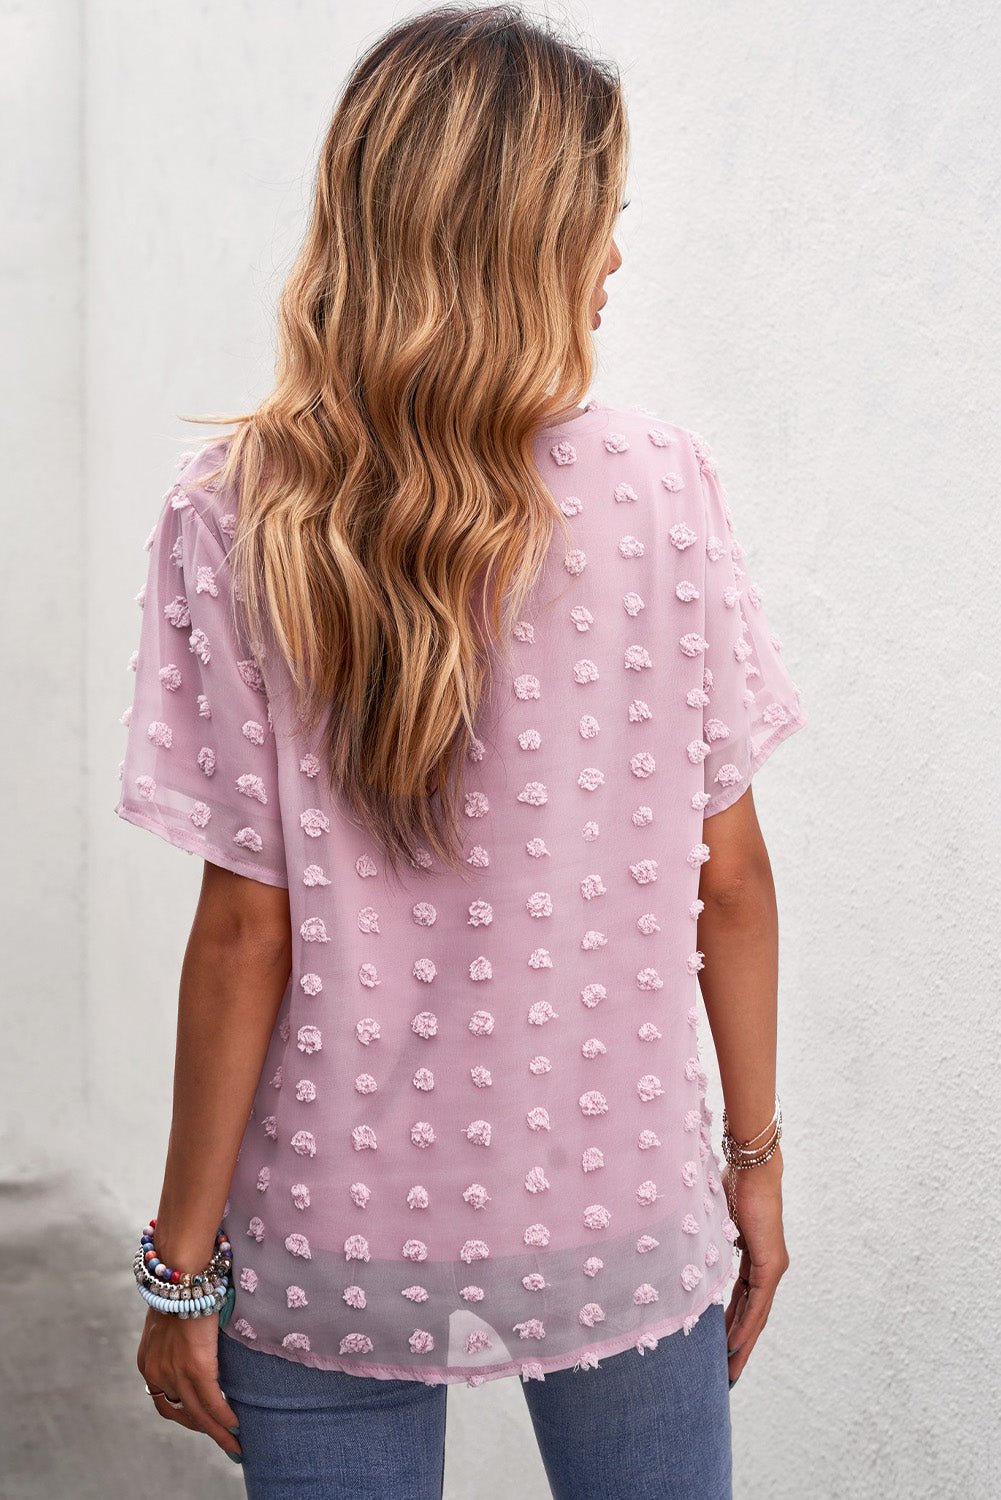 Polka Dot Sheer Blouse - pink blouse with polka dots that has short sleeves and a round neck. #Firefly Lane Boutique1